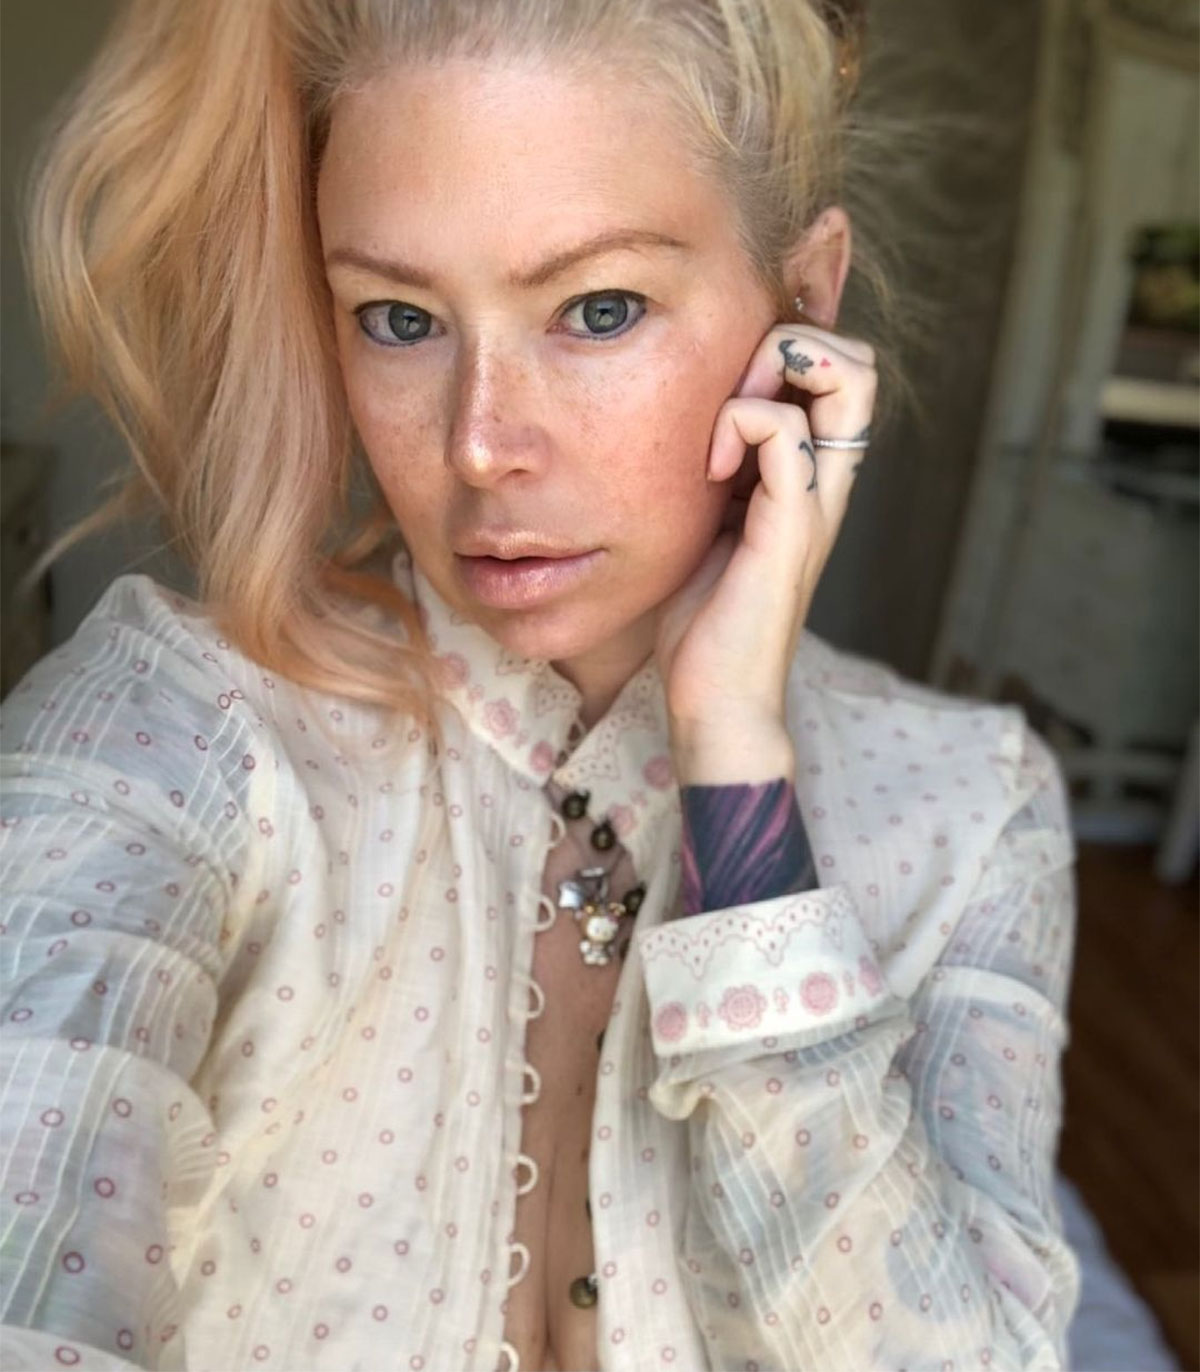 Jena Jacsan Porn Star Com - Jenna Jameson Has Guillain-Barre Syndrome After Being Unable to Walk